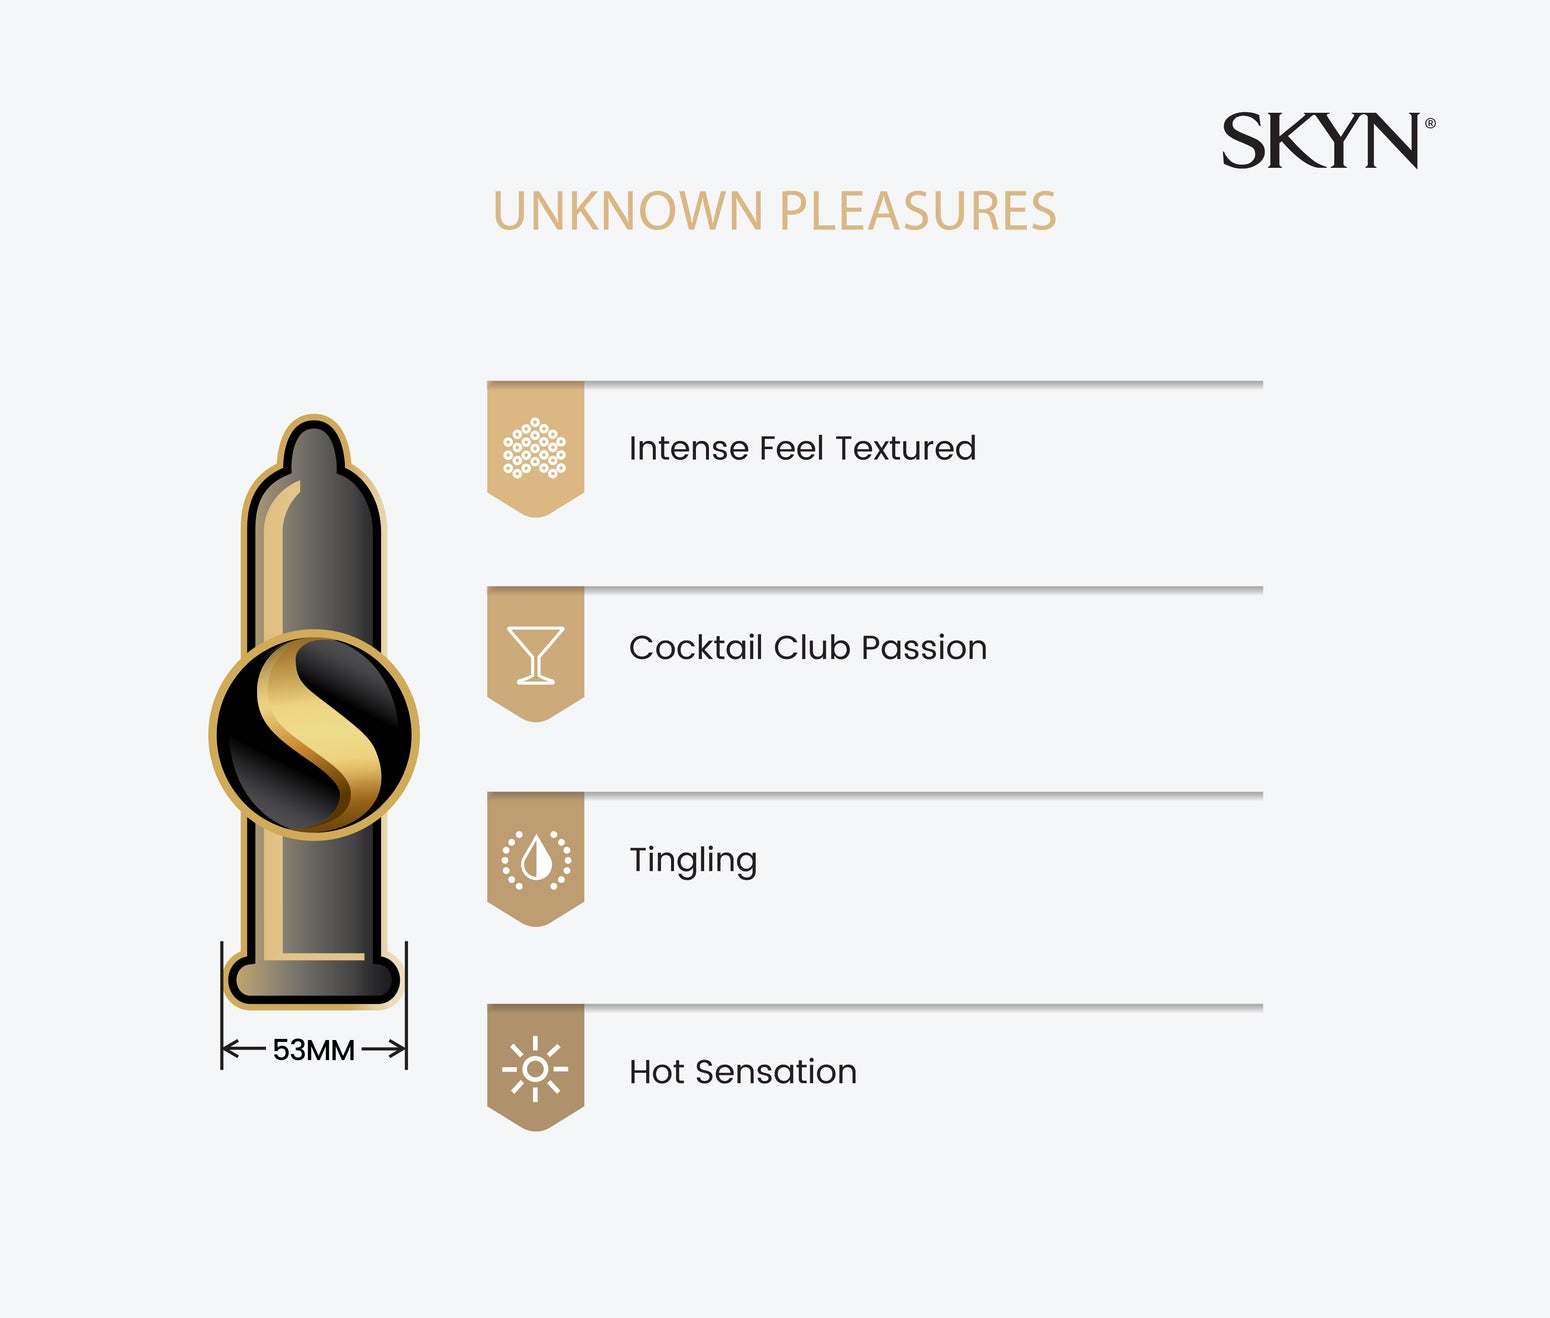 SKYN® UNKNOWN PLEASURES LIMITED-EDITION 14 PACK OF NON LATEX CONDOMS